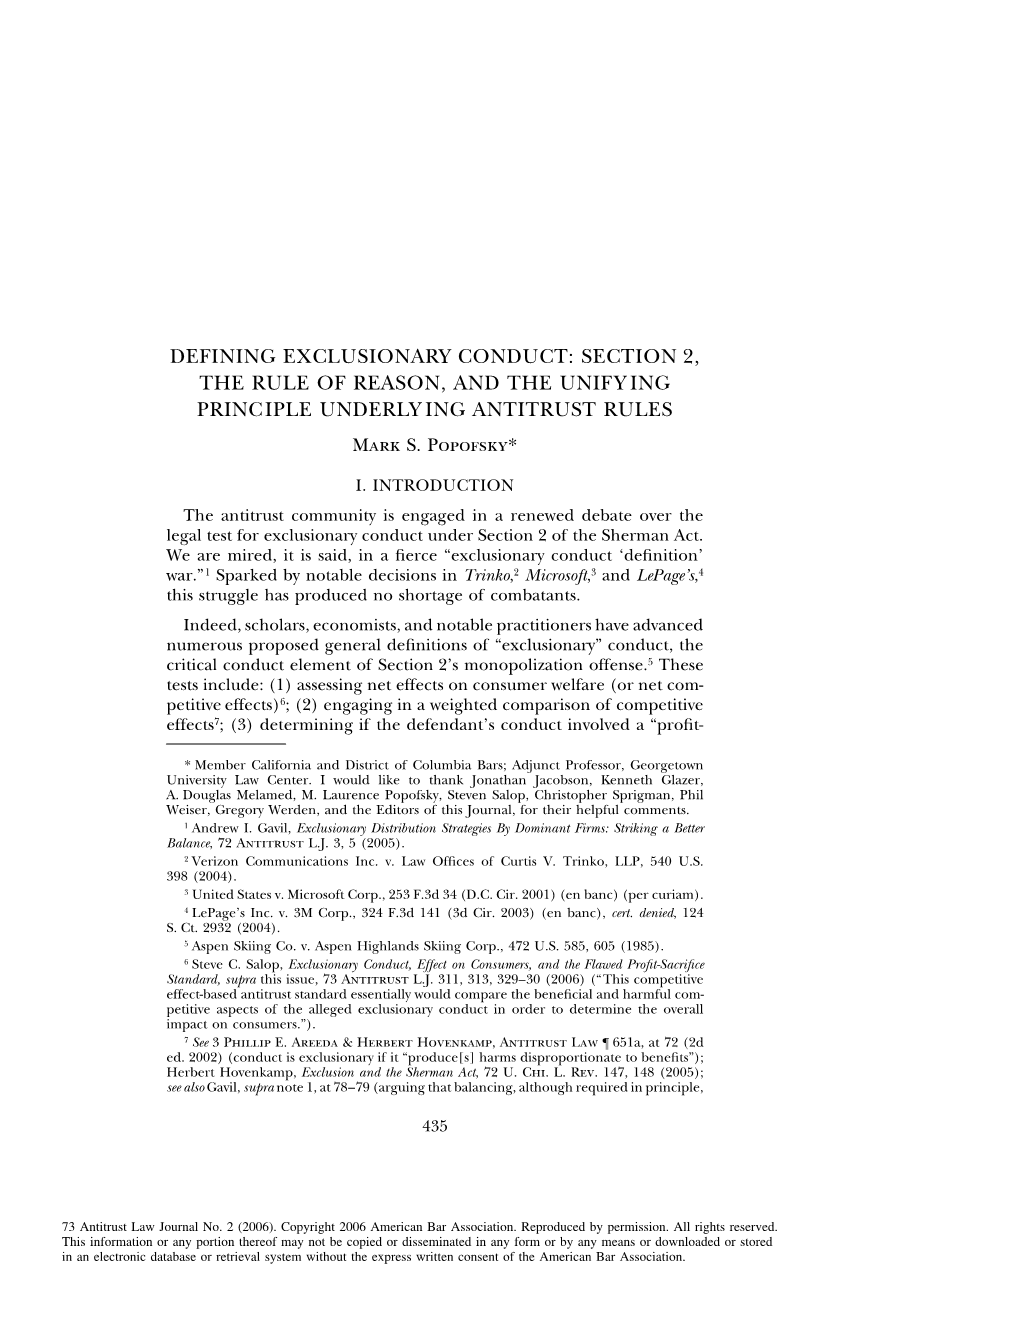 DEFINING EXCLUSIONARY CONDUCT: SECTION 2, the RULE of REASON, and the UNIFY ING PRINCIPLE UNDERLY ING ANTITRUST RULES Mark S